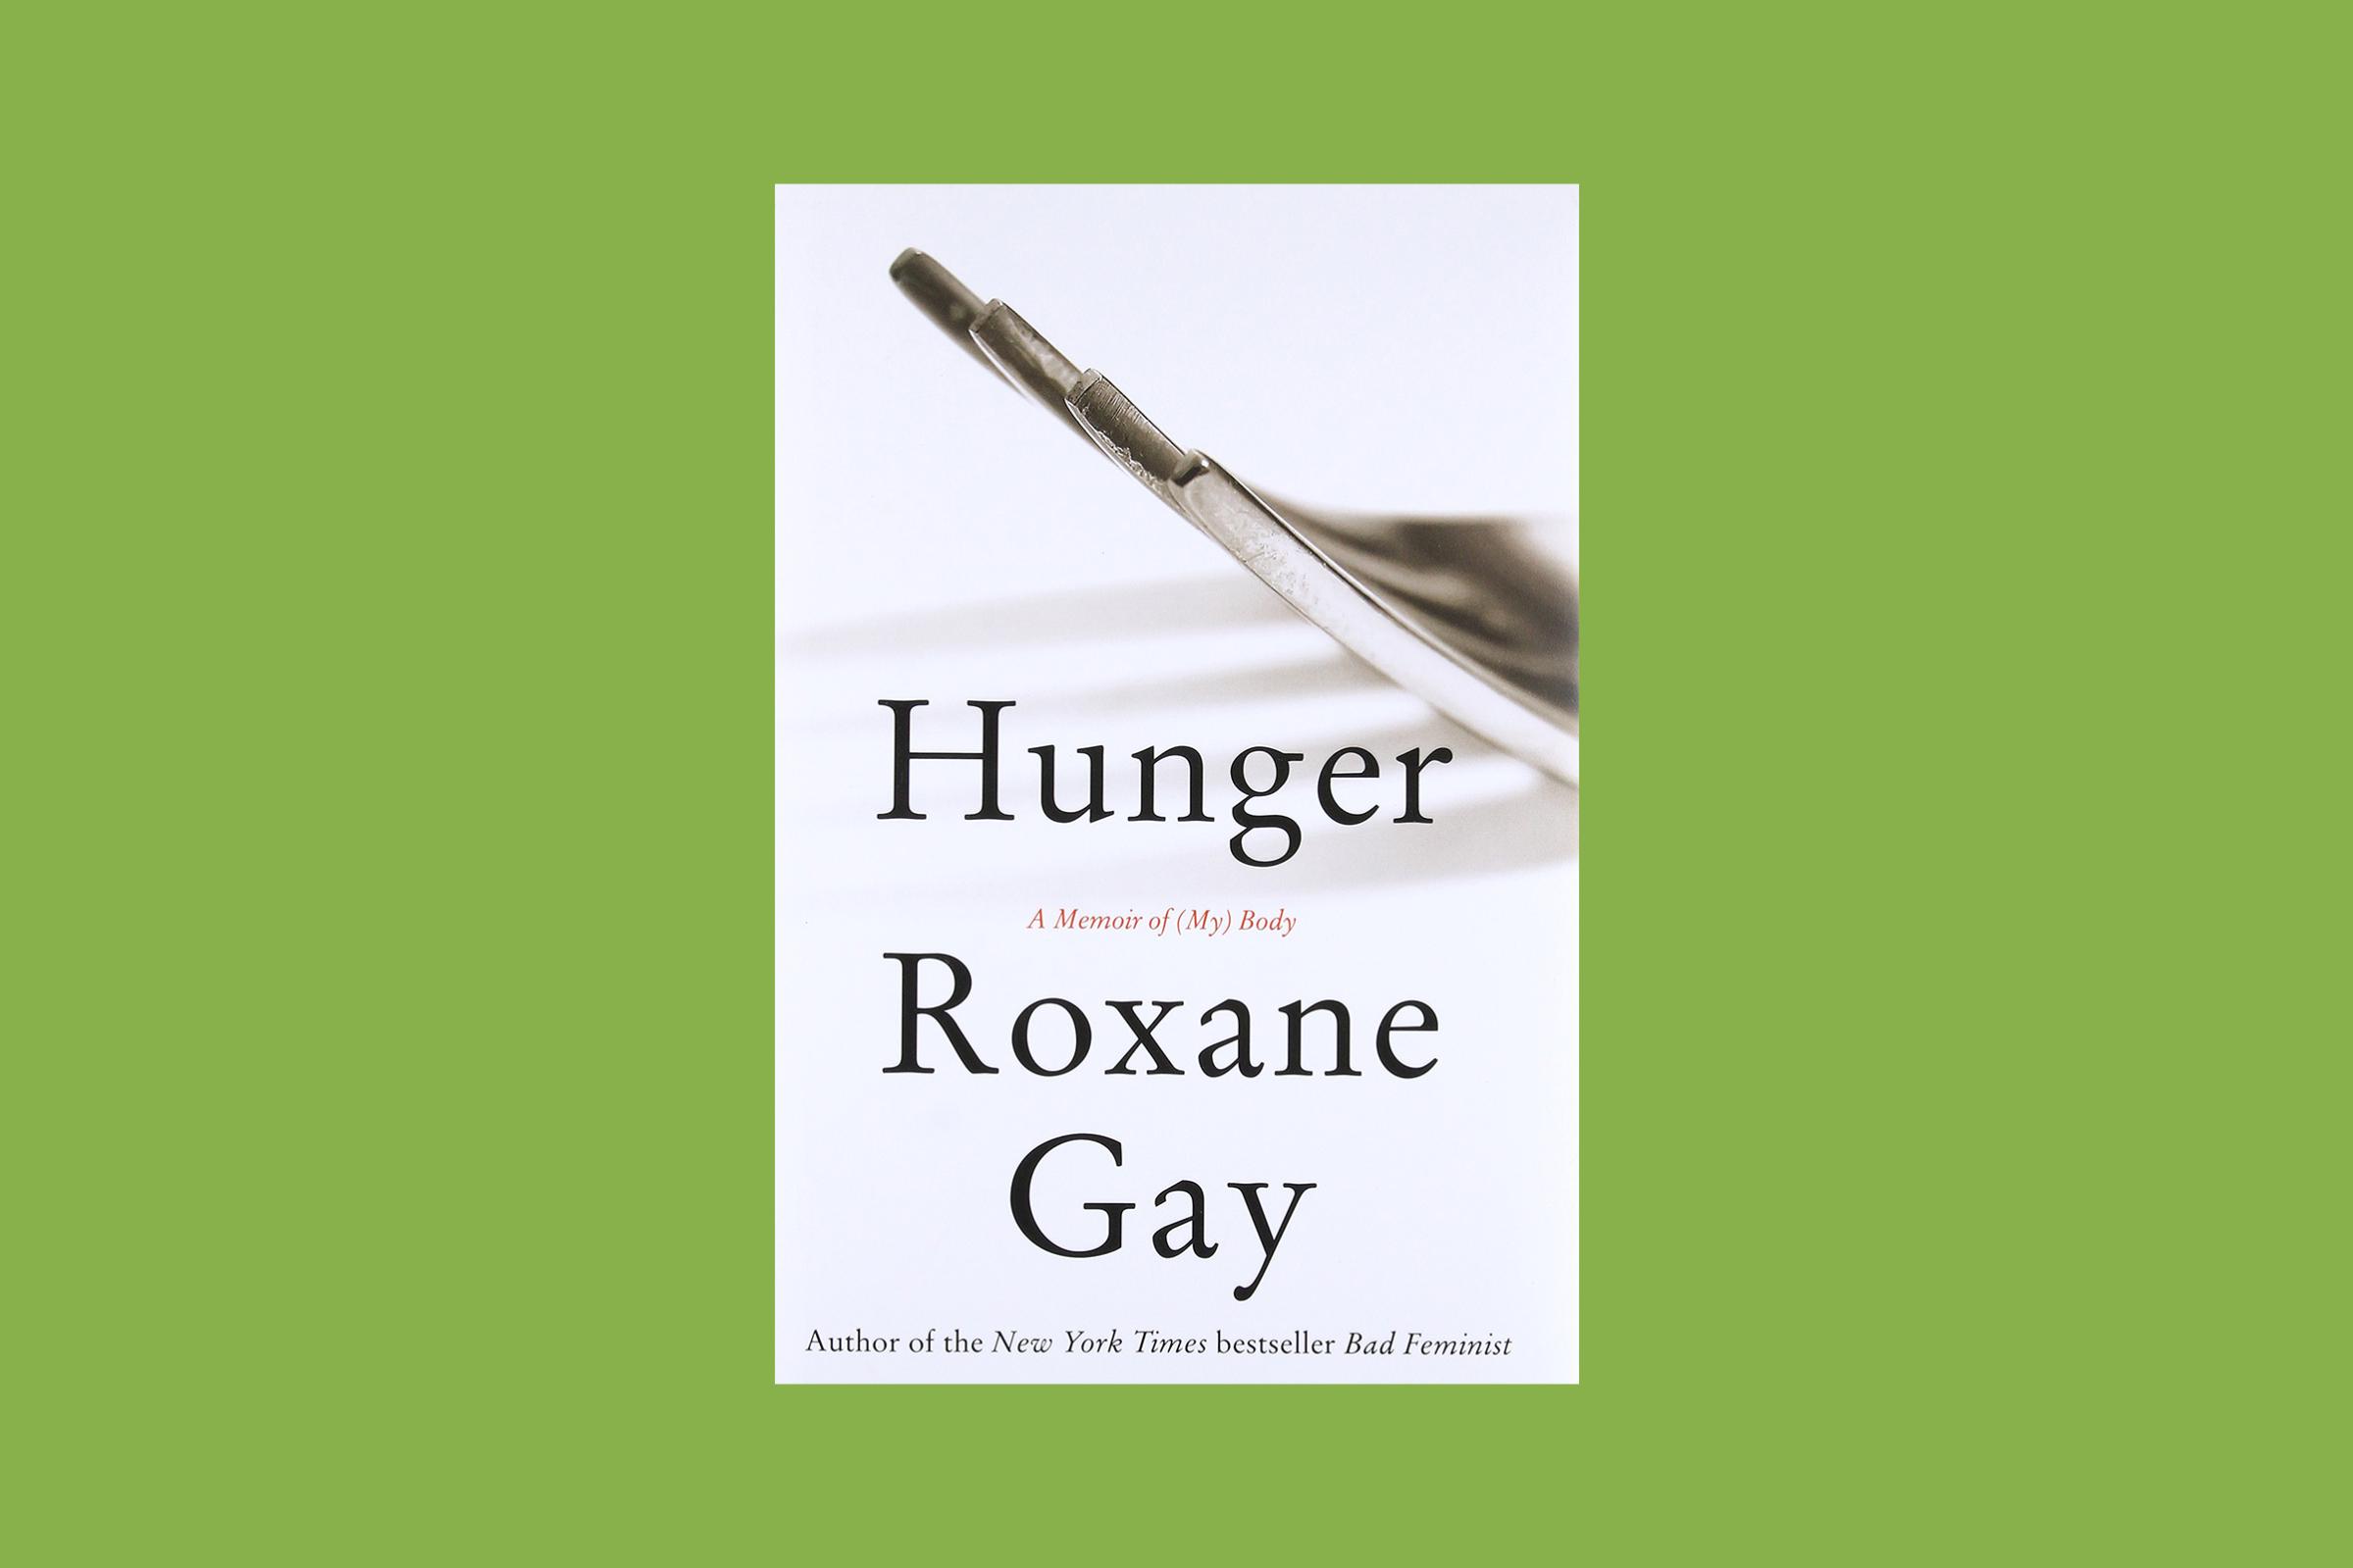 Hunger is one of the top 10 non-fiction books of 2017